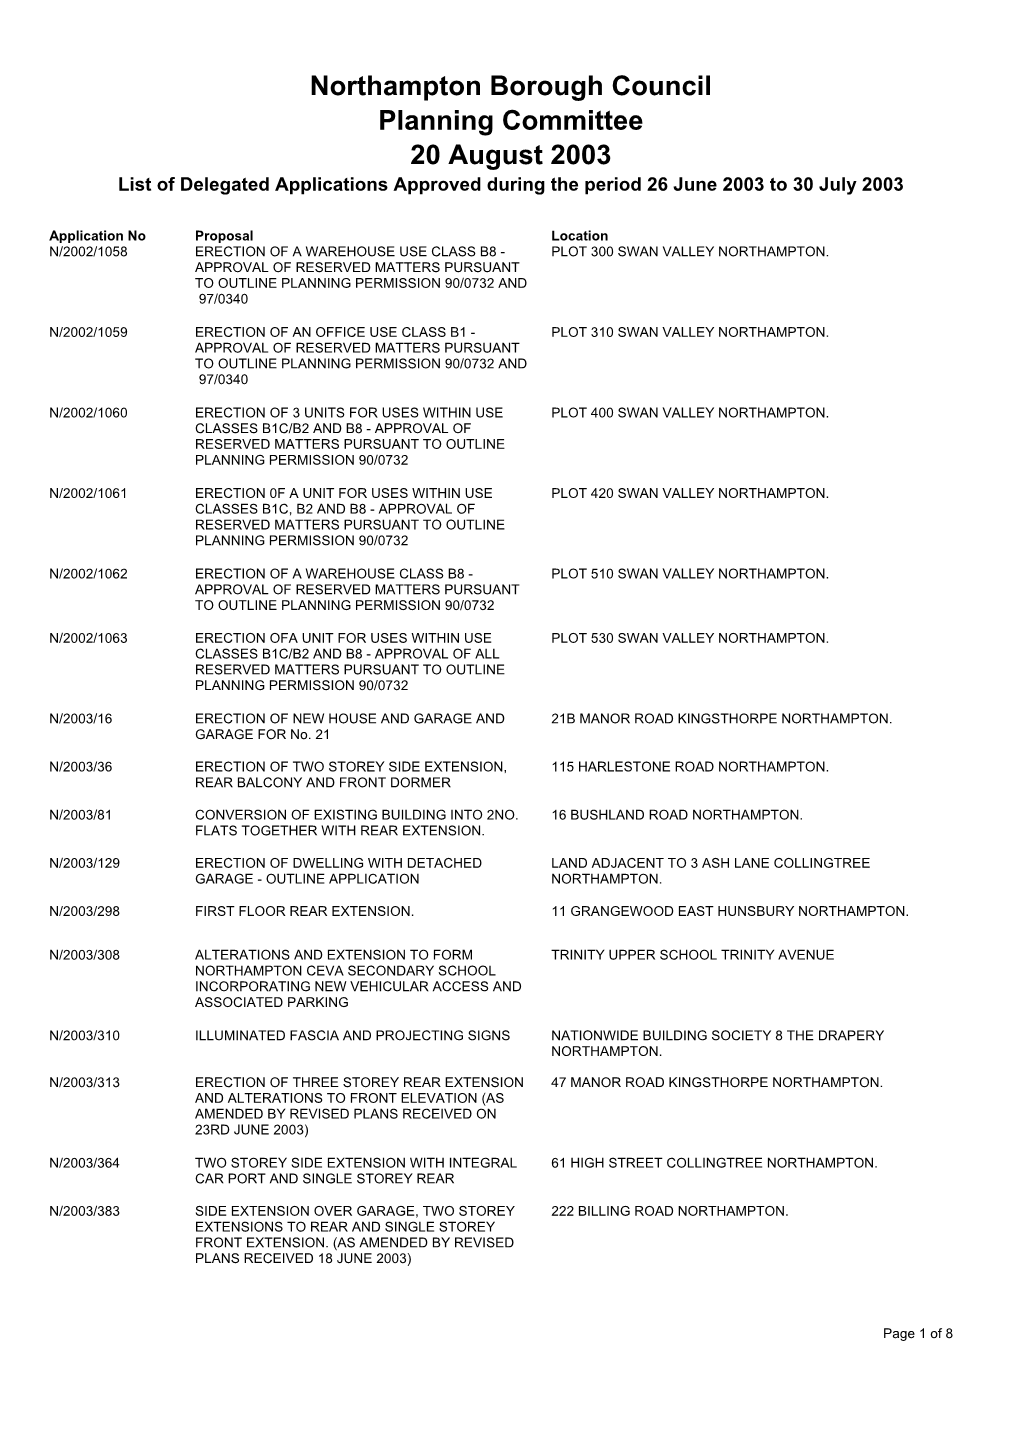 Northampton Borough Council Planning Committee 20 August 2003 List of Delegated Applications Approved During the Period 26 June 2003 to 30 July 2003